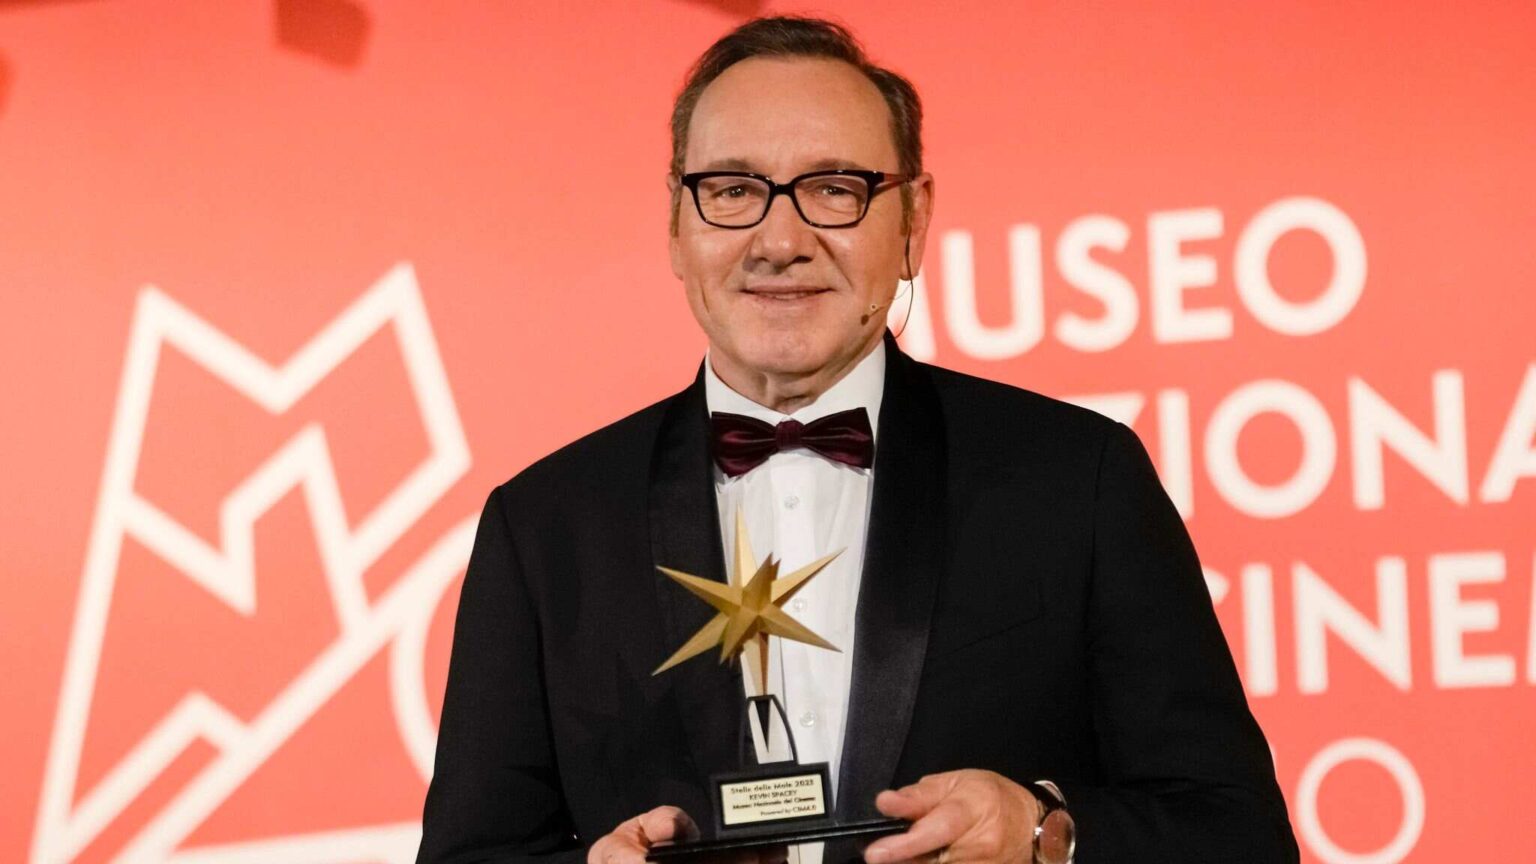 Kevin Spacey given acting award in Italy